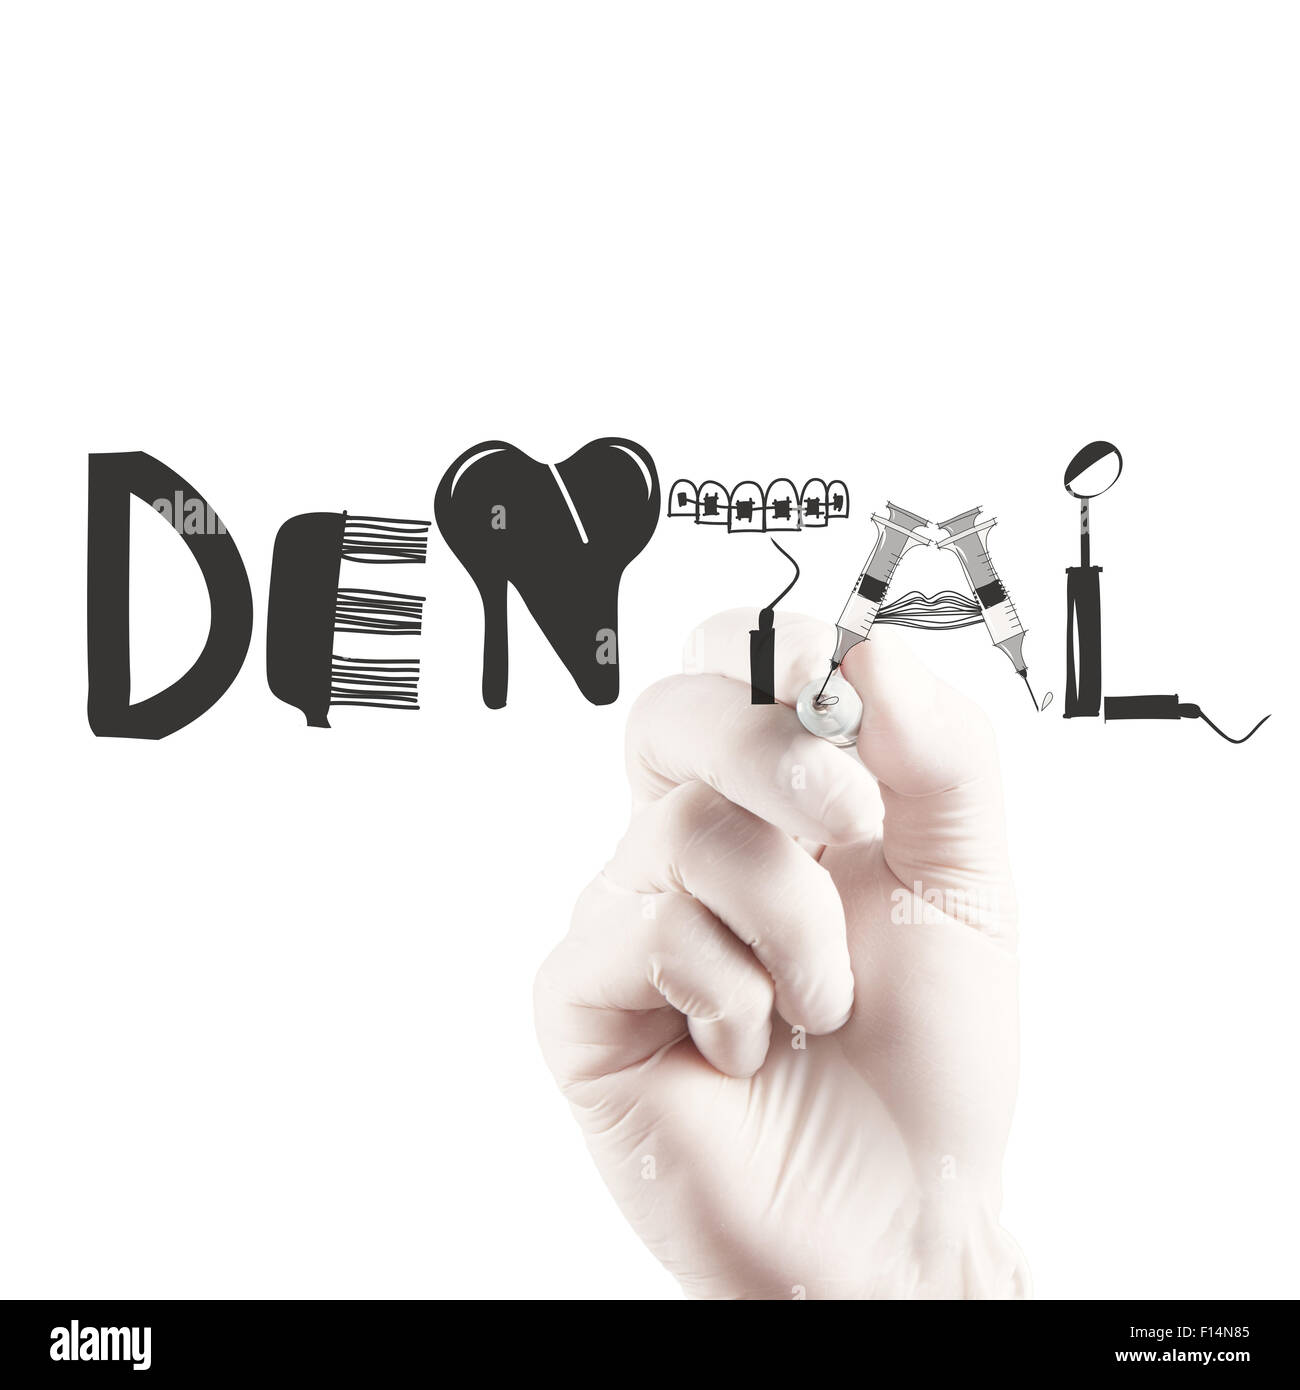 doctor hand drawing design word DENTAL as concept Stock Photo